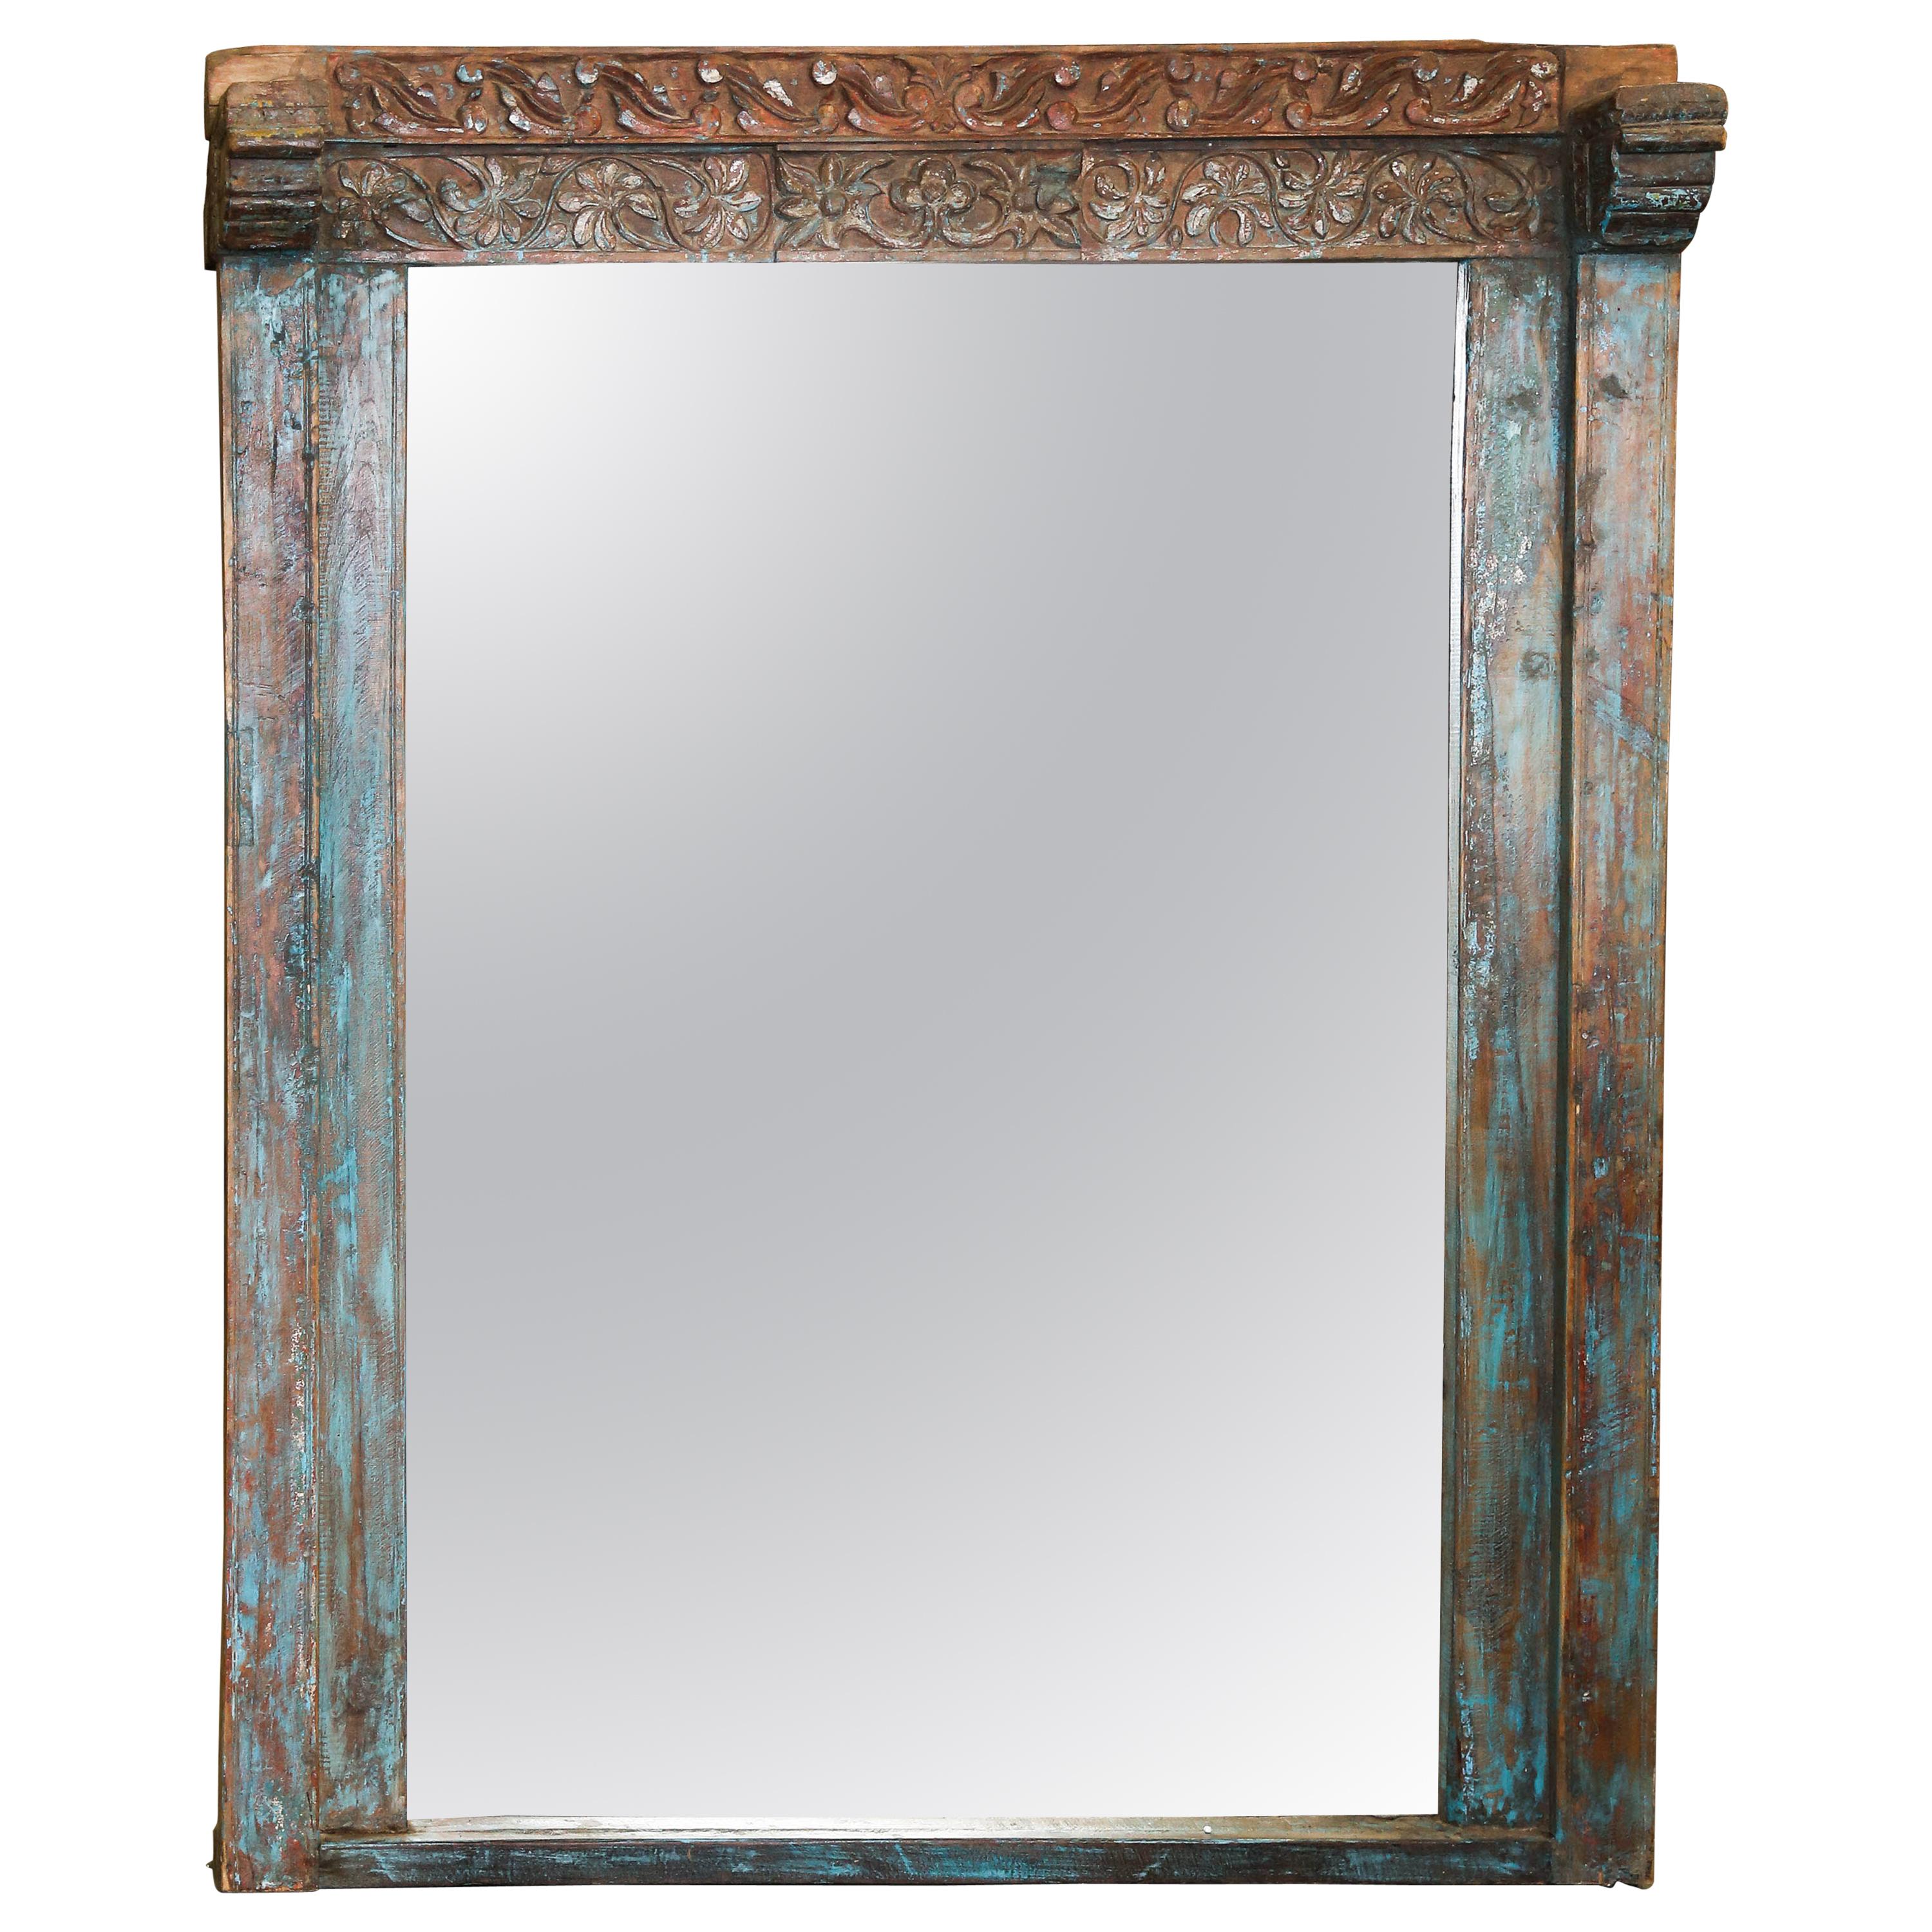 Custom Made Mirror from a Solid Teak Wood Window Frame of 1850s Settler's Home For Sale